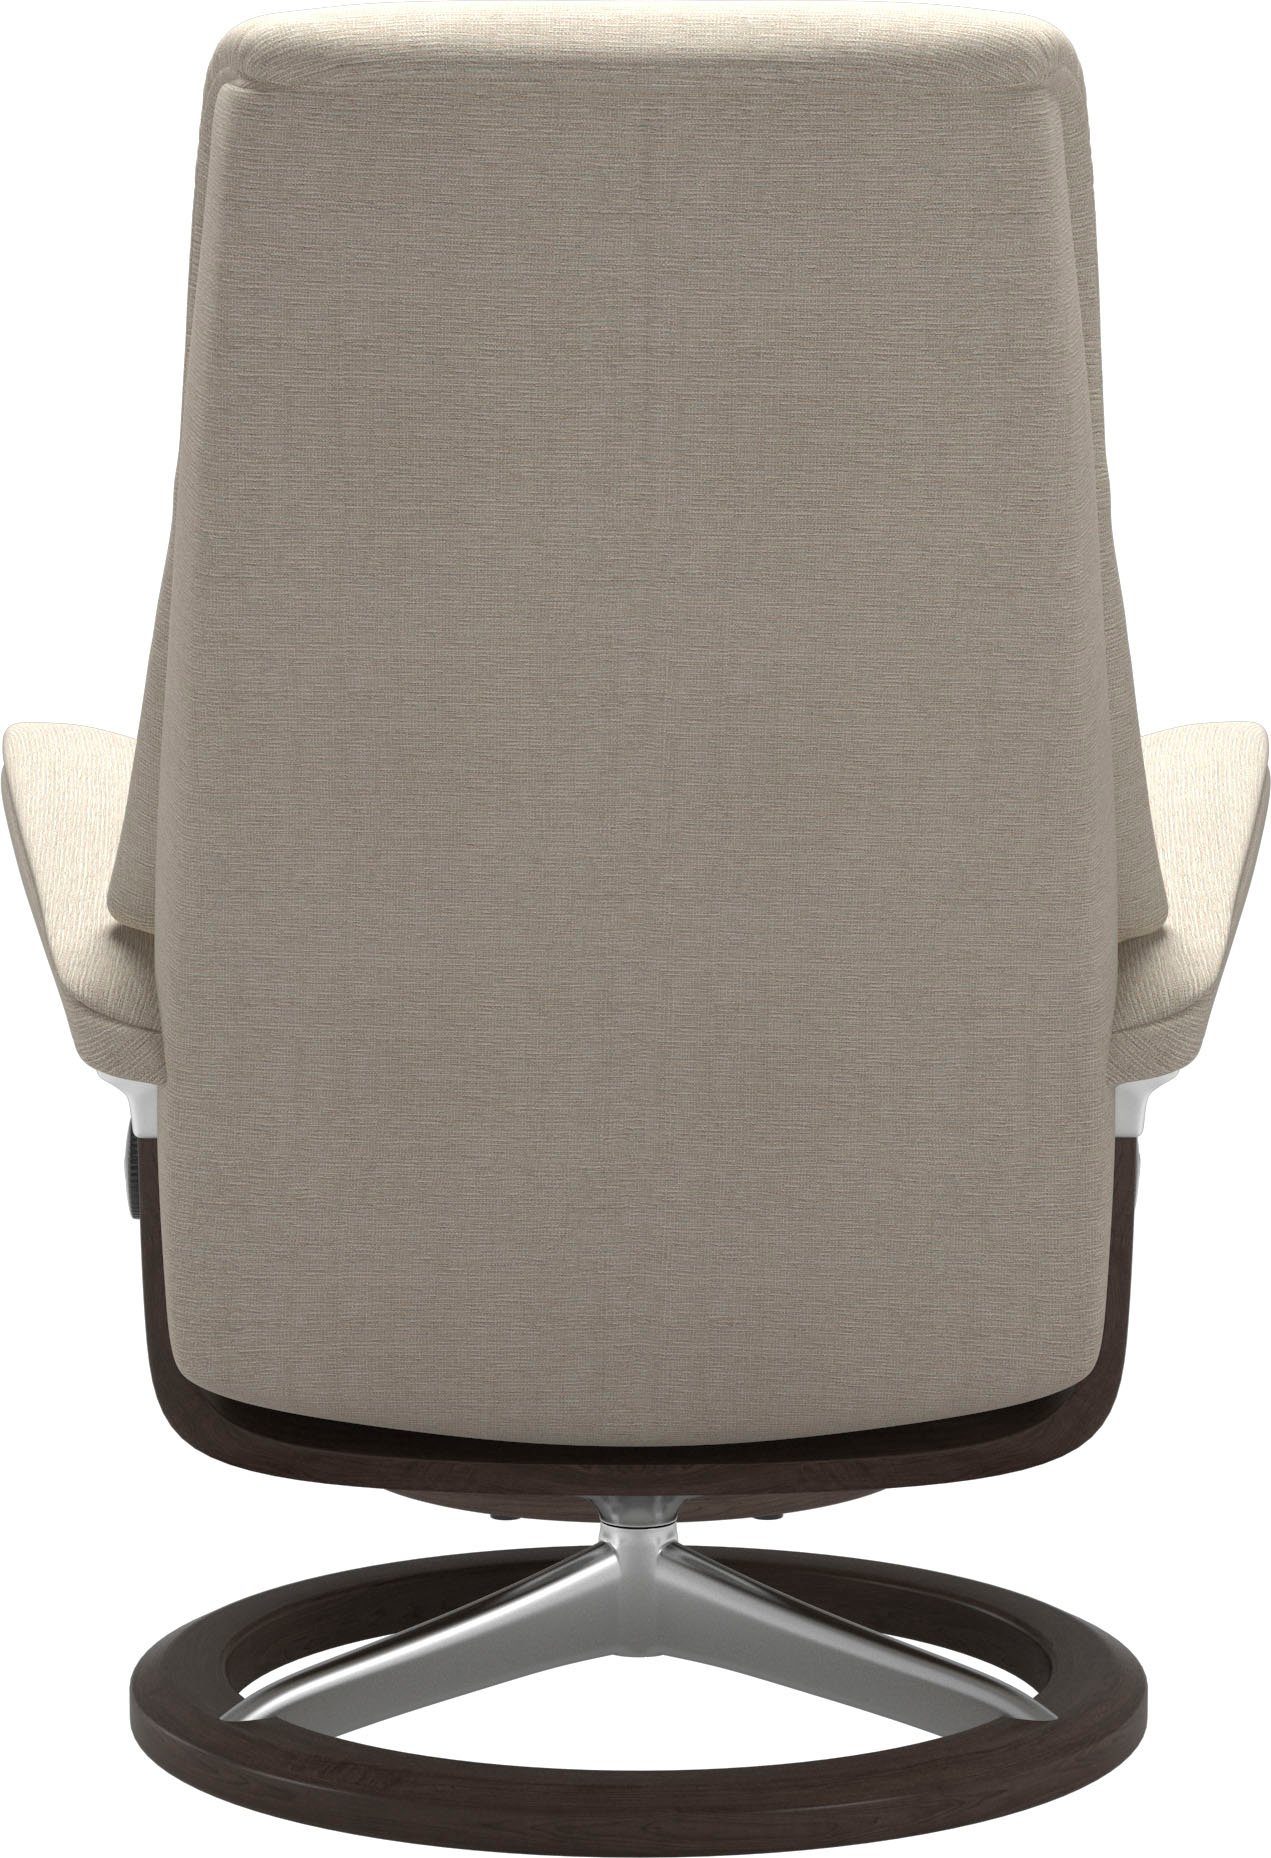 S,Gestell Base, Wenge mit View, Größe Stressless® Signature Relaxsessel